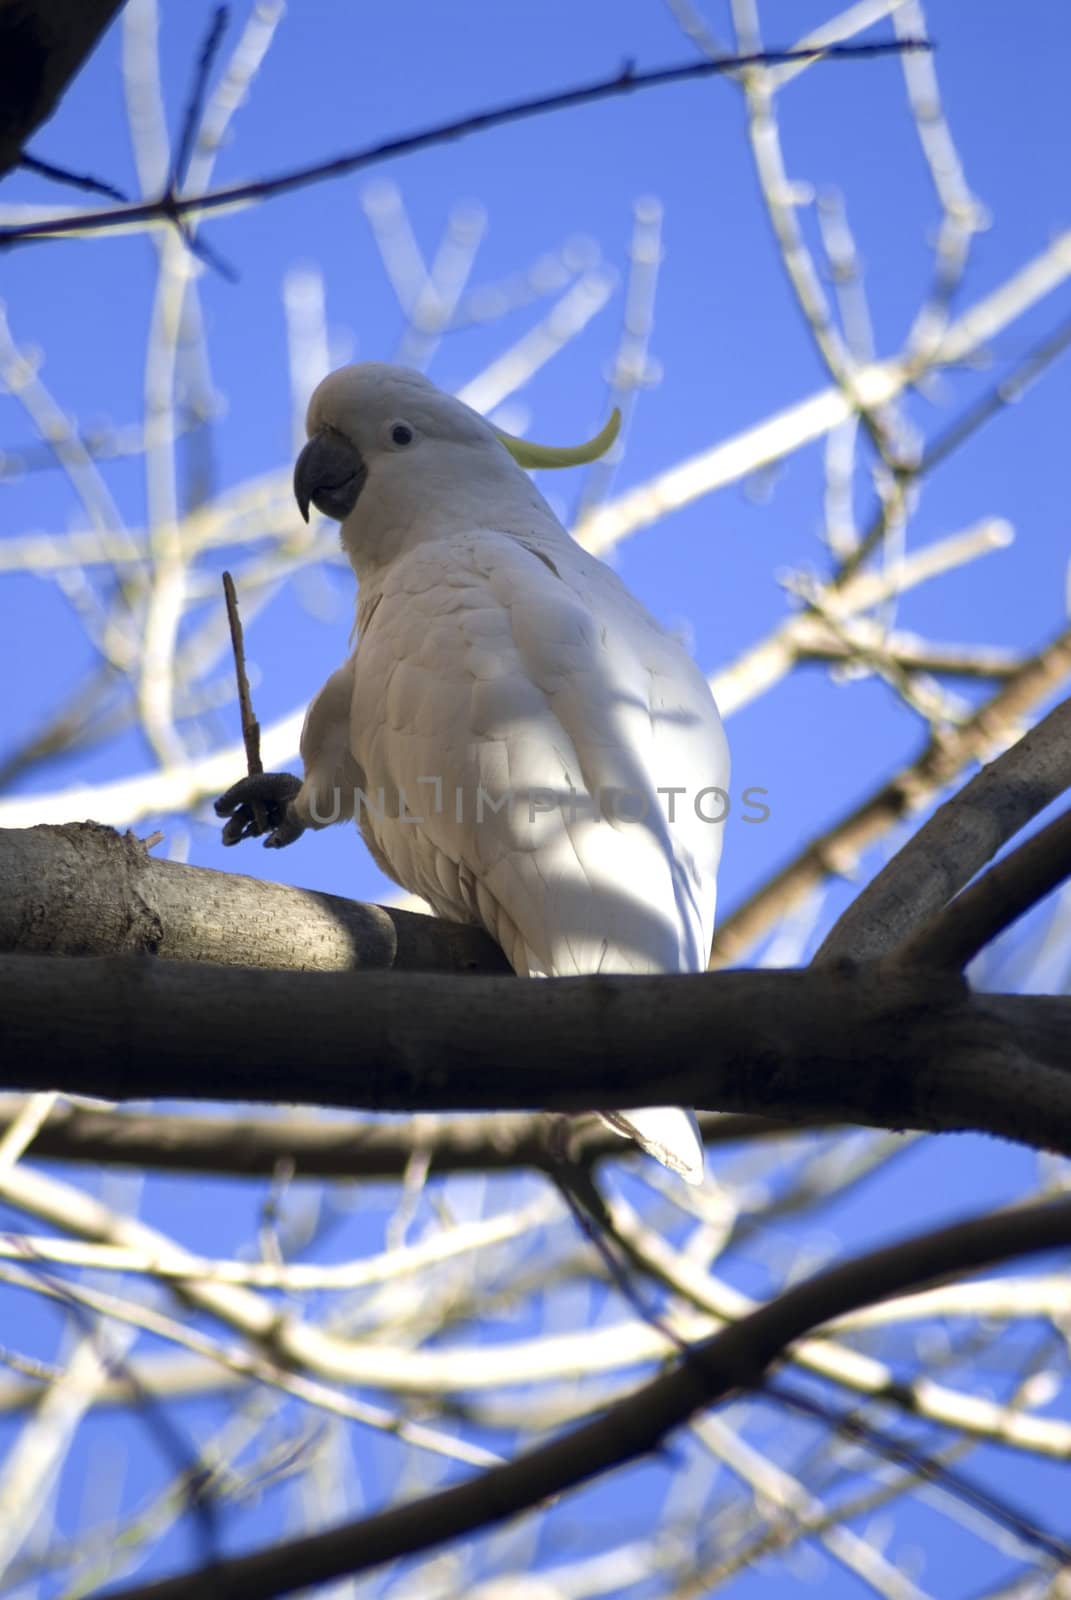 sulpher crested cockatoo by stockarch